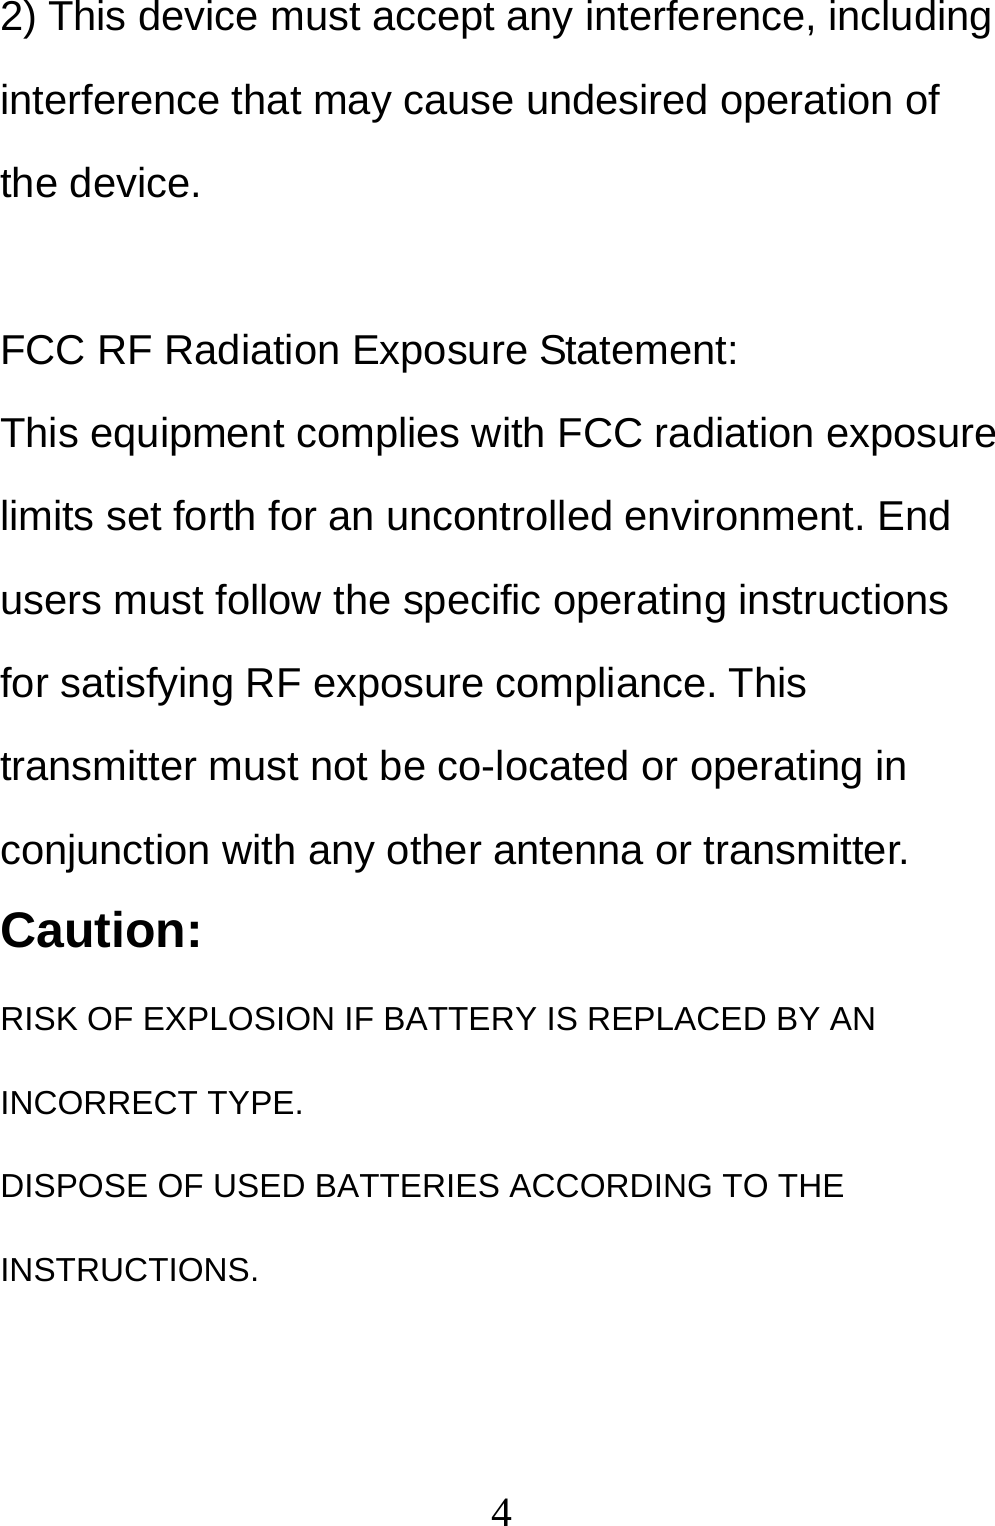  42) This device must accept any interference, including interference that may cause undesired operation of the device.  FCC RF Radiation Exposure Statement: This equipment complies with FCC radiation exposure limits set forth for an uncontrolled environment. End users must follow the specific operating instructions for satisfying RF exposure compliance. This transmitter must not be co-located or operating in conjunction with any other antenna or transmitter. Caution: RISK OF EXPLOSION IF BATTERY IS REPLACED BY AN INCORRECT TYPE.  DISPOSE OF USED BATTERIES ACCORDING TO THE INSTRUCTIONS. 